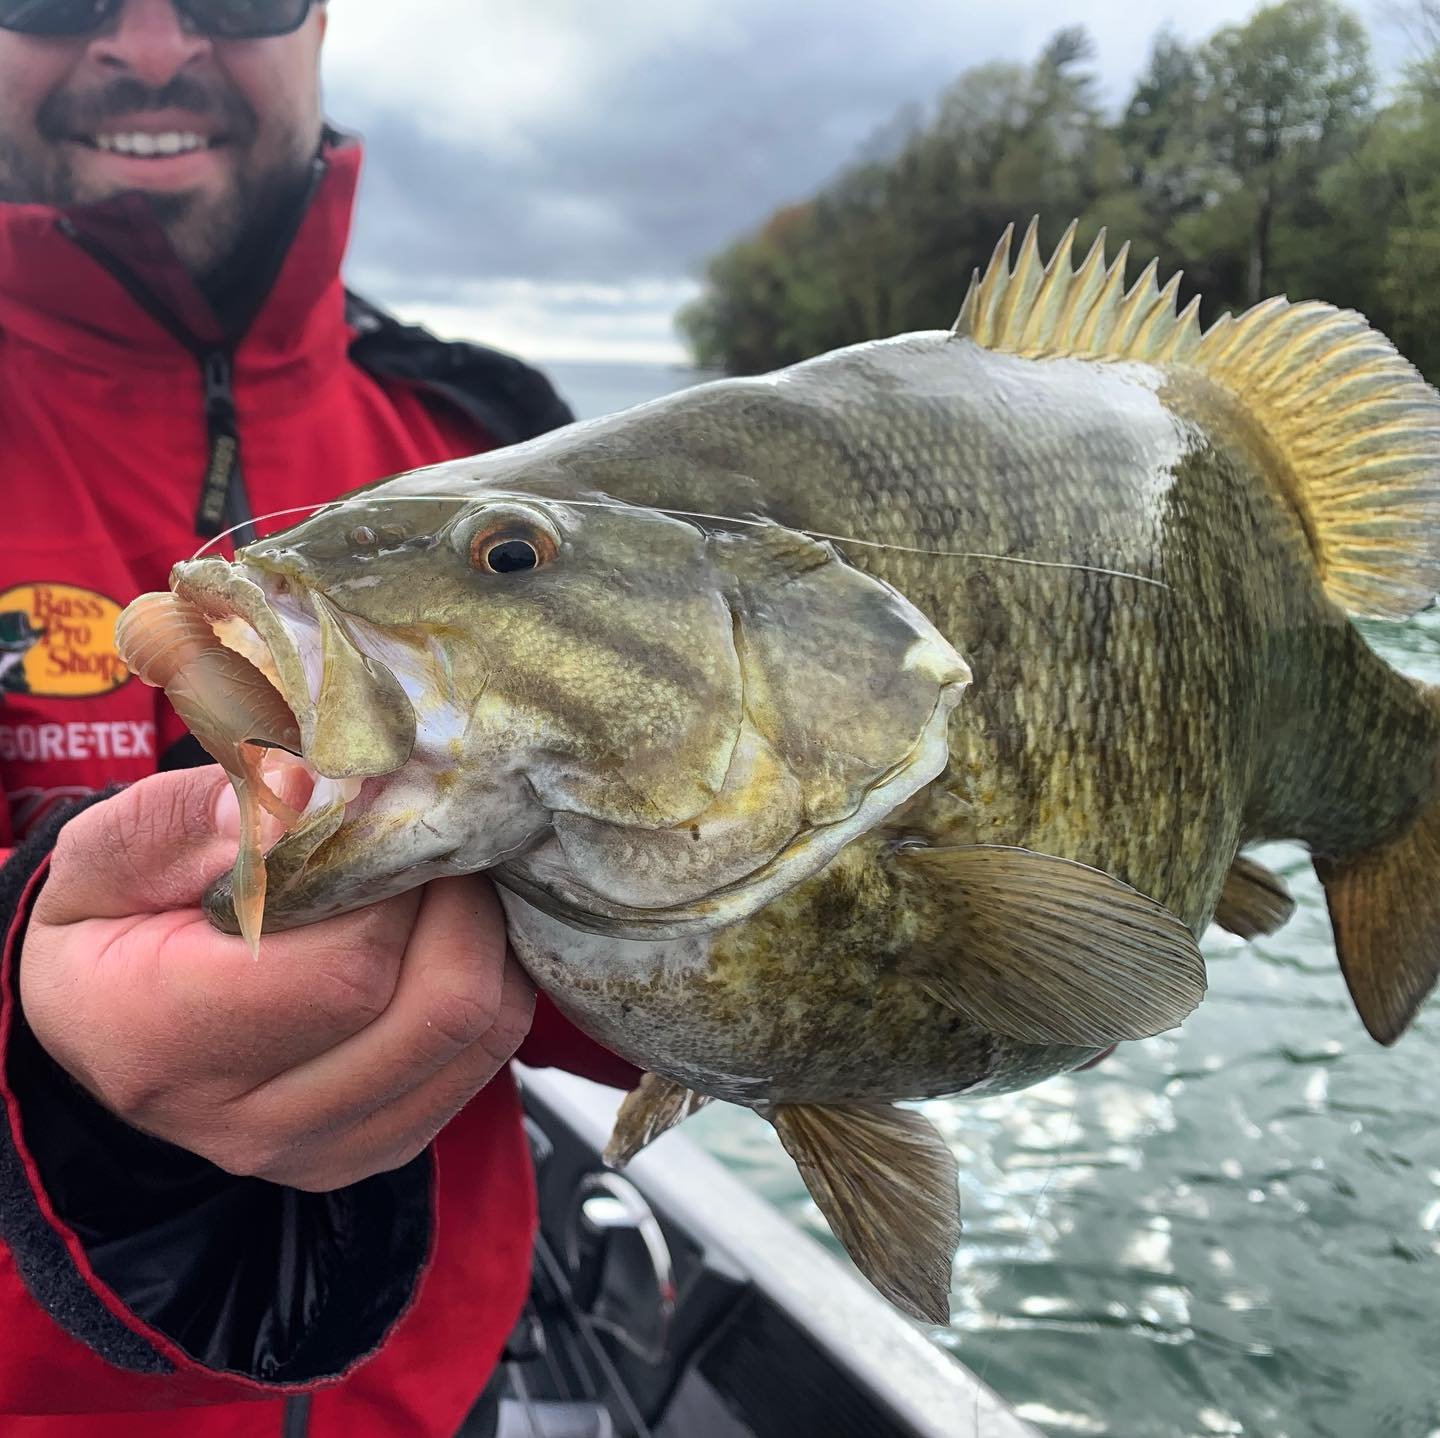 😳Have you tried dead sticking a 2.5&rdquo; Juvy Craw tube? You should! 

Bait: 2.5&rdquo; Juvy Craw (motor oil) with a 3/16oz Mini Pro Tube Head insert. 

Buy at Lurenet.com (@lurenetfishing) or from our select retailer partners. 

#greatlakesfiness